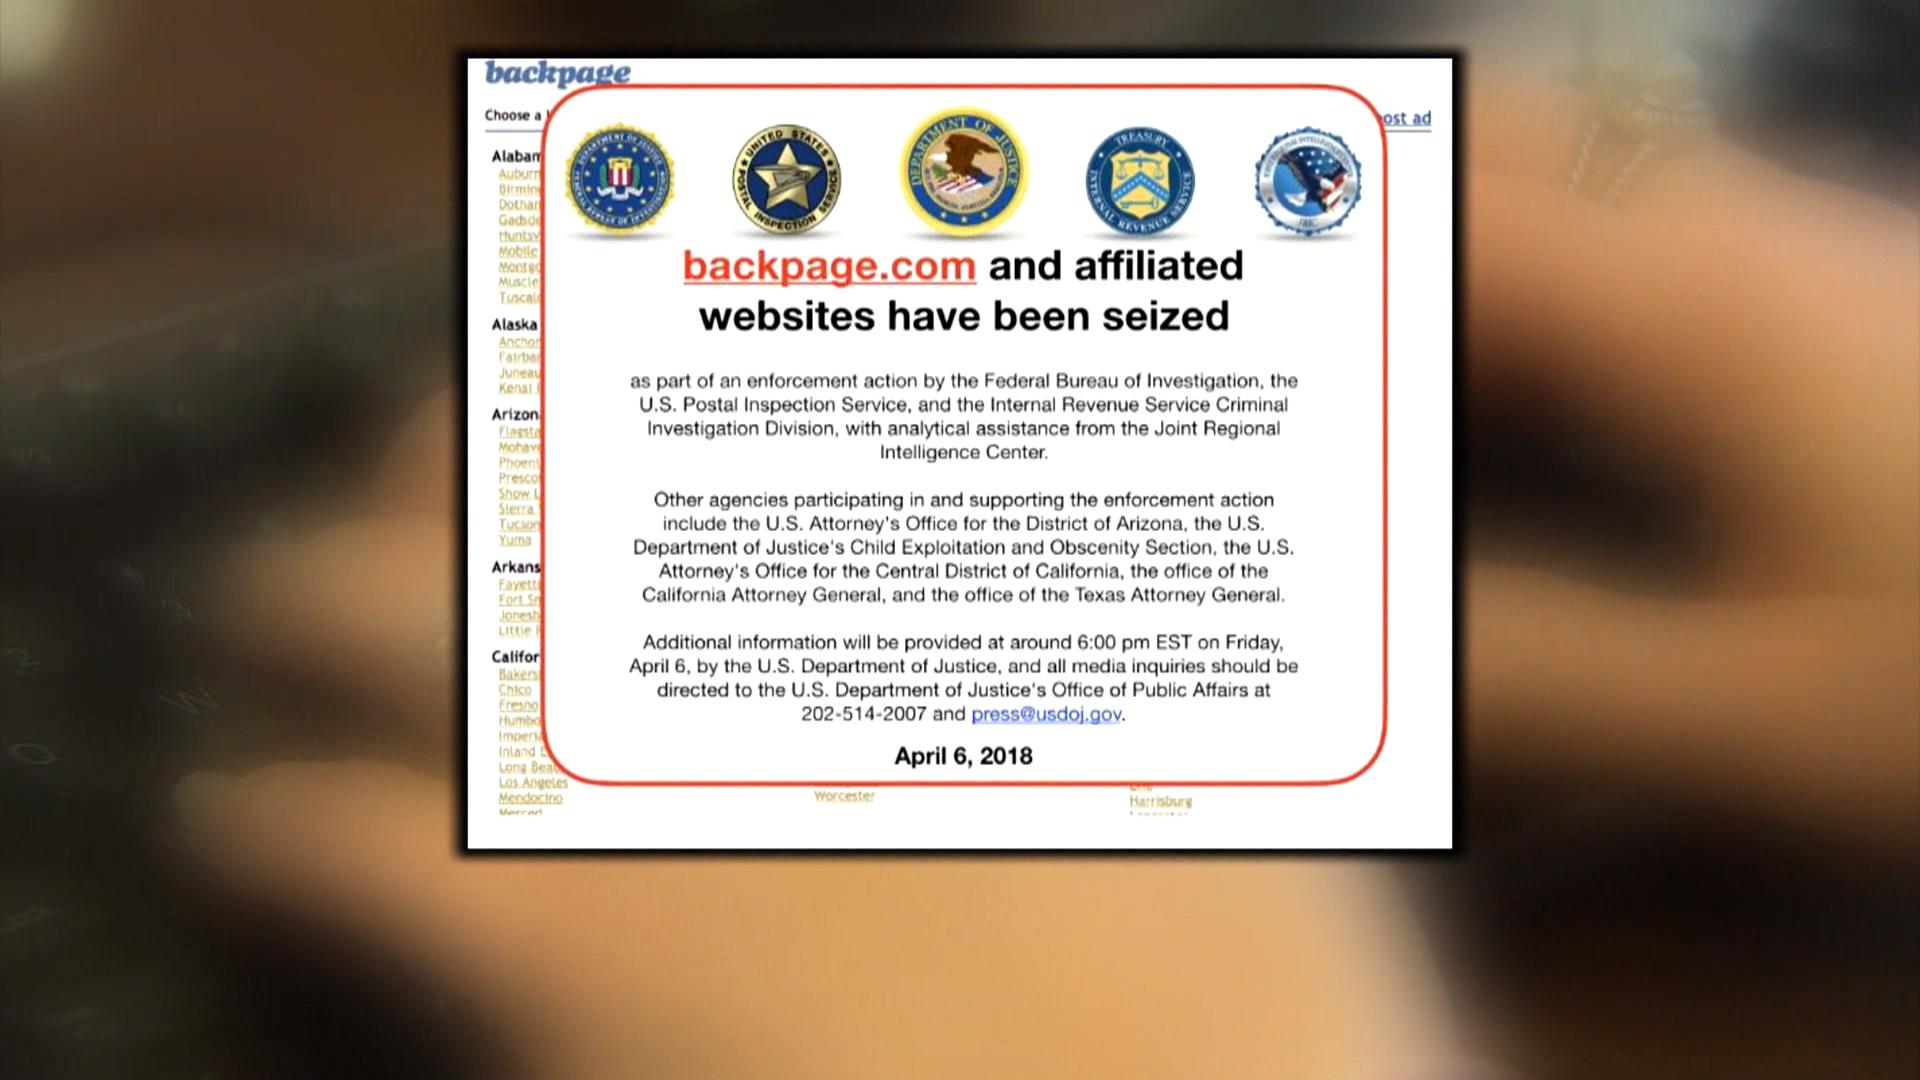 Federal authorities shut down classified ads site Backpage.